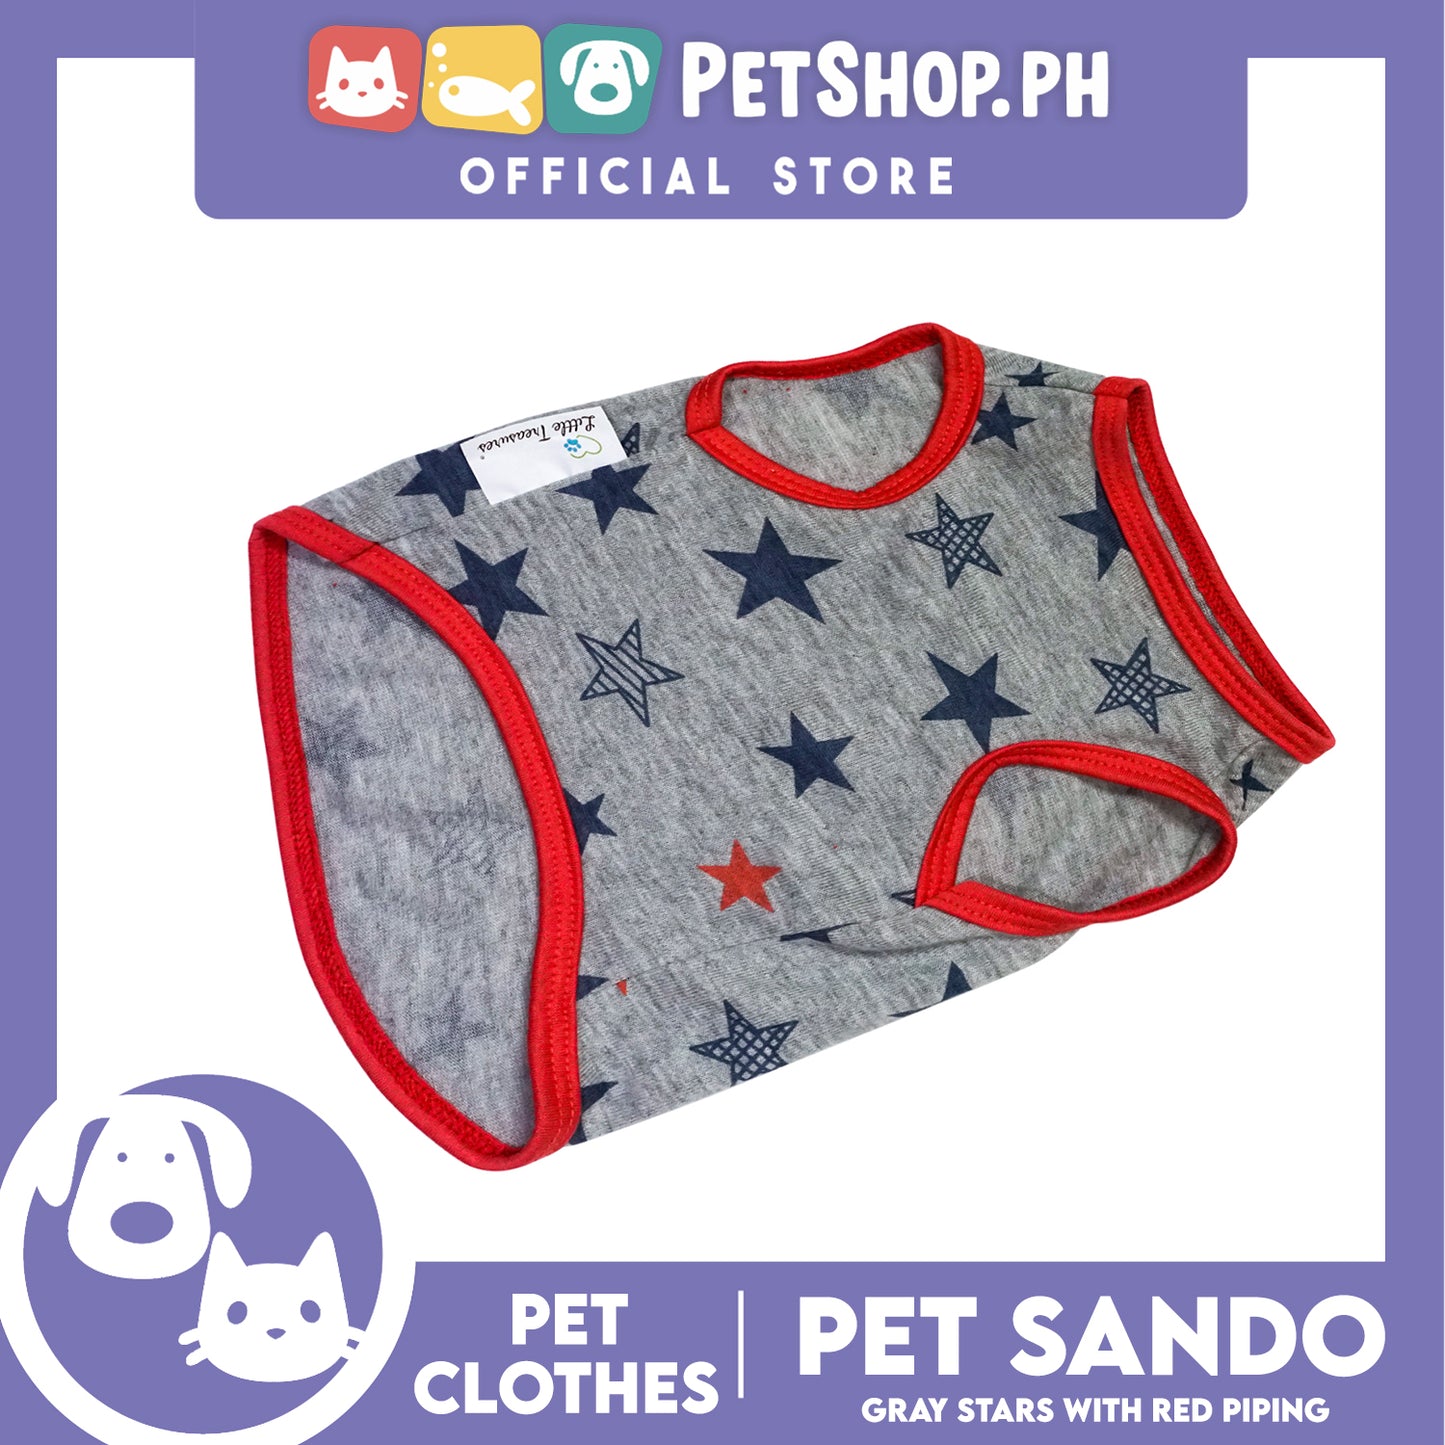 Pet Sando Gray Stars with Red Piping (Medium) Pet Shirt Clothes Perfect fit for Dogs